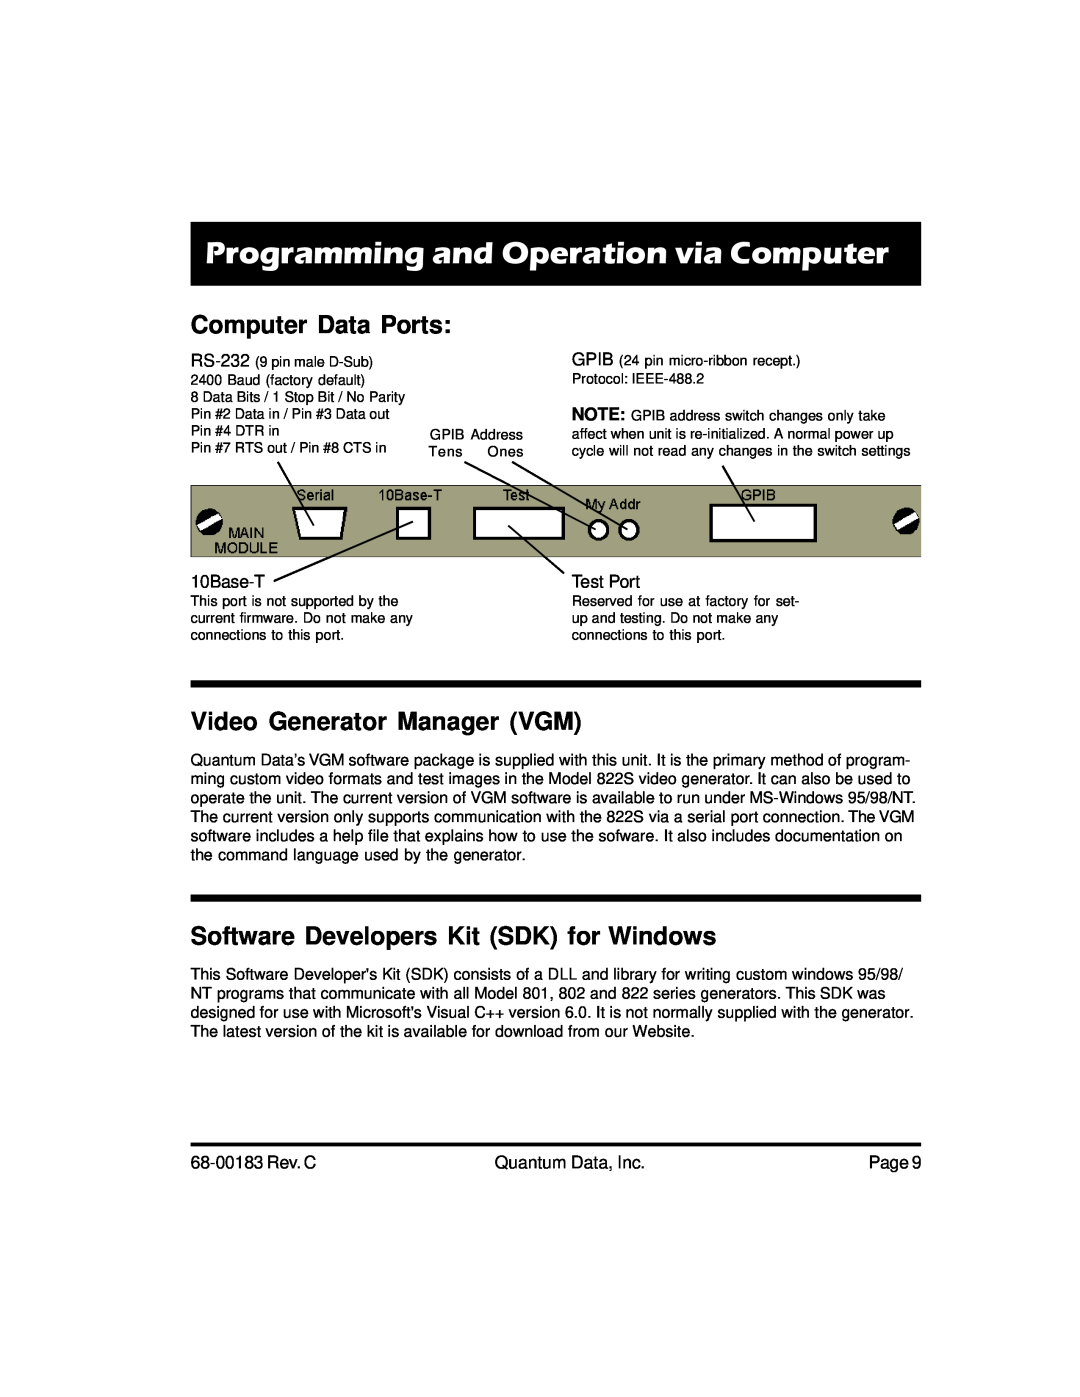 Quantum Data 822S quick start Programming and Operation via Computer, Computer Data Ports, Video Generator Manager VGM 